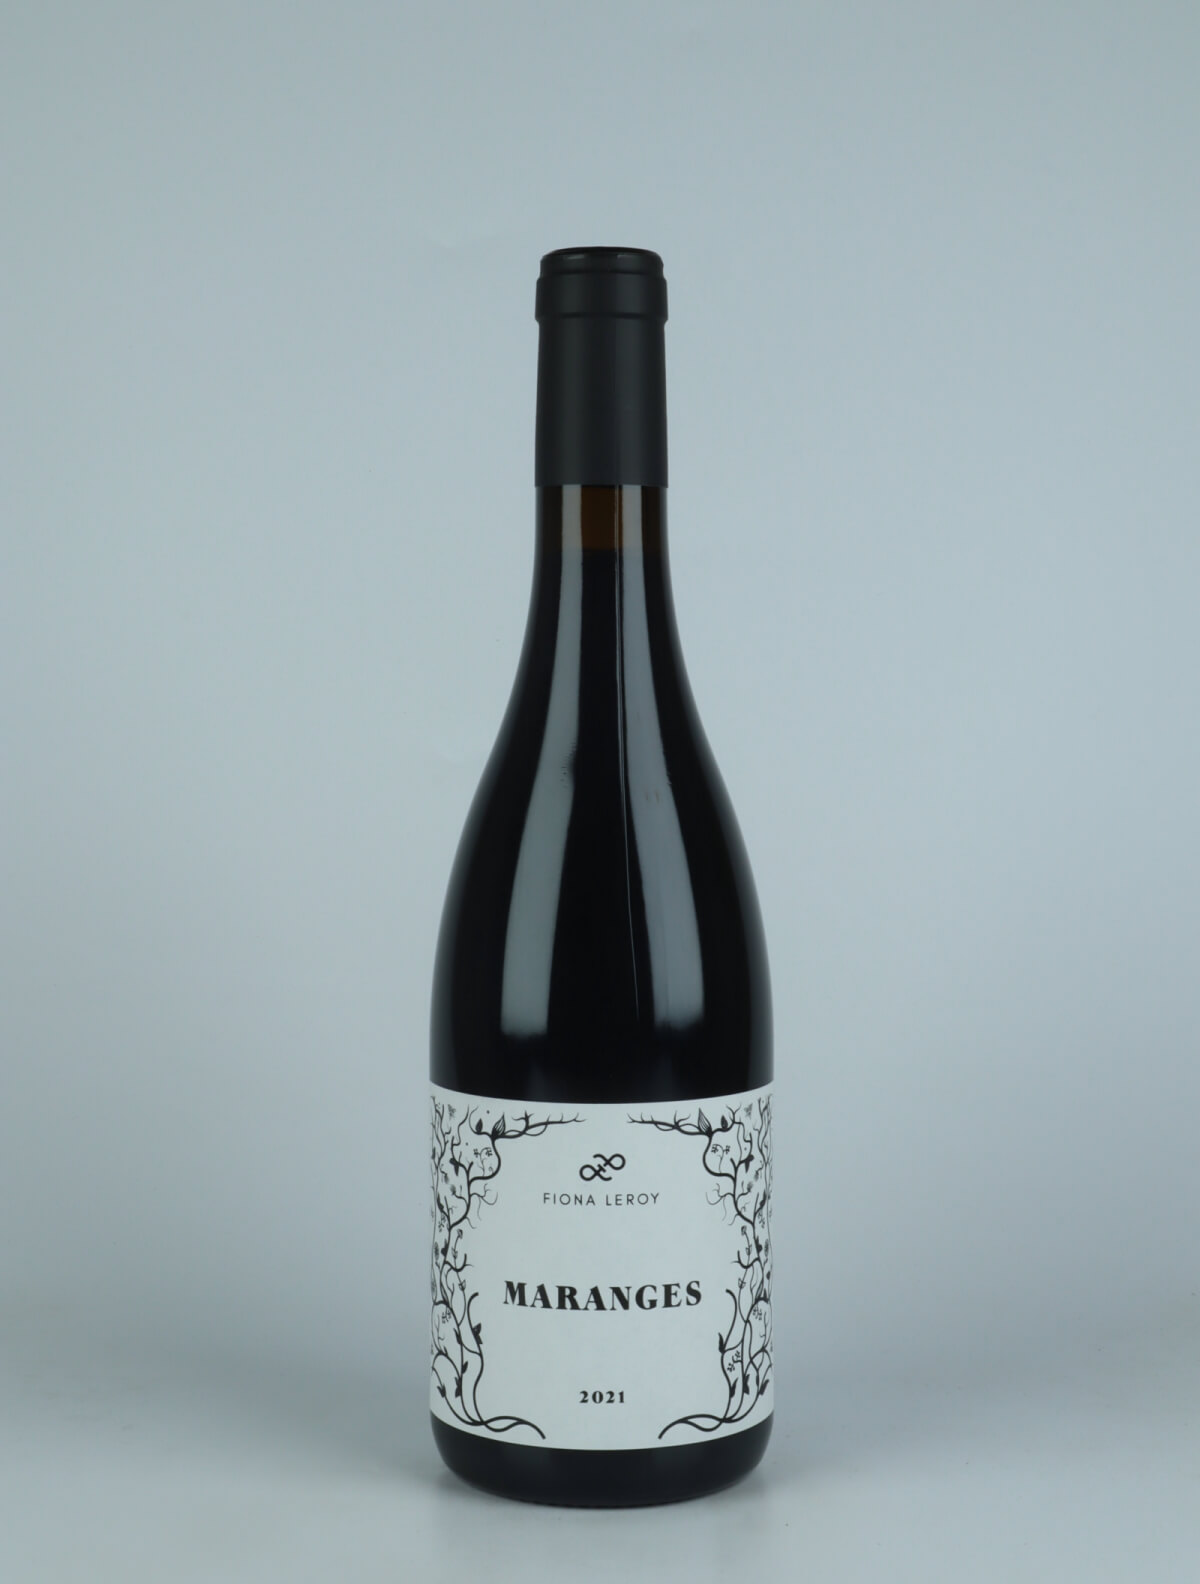 A bottle 2021 Maranges Rouge Red wine from Fiona Leroy, Burgundy in France